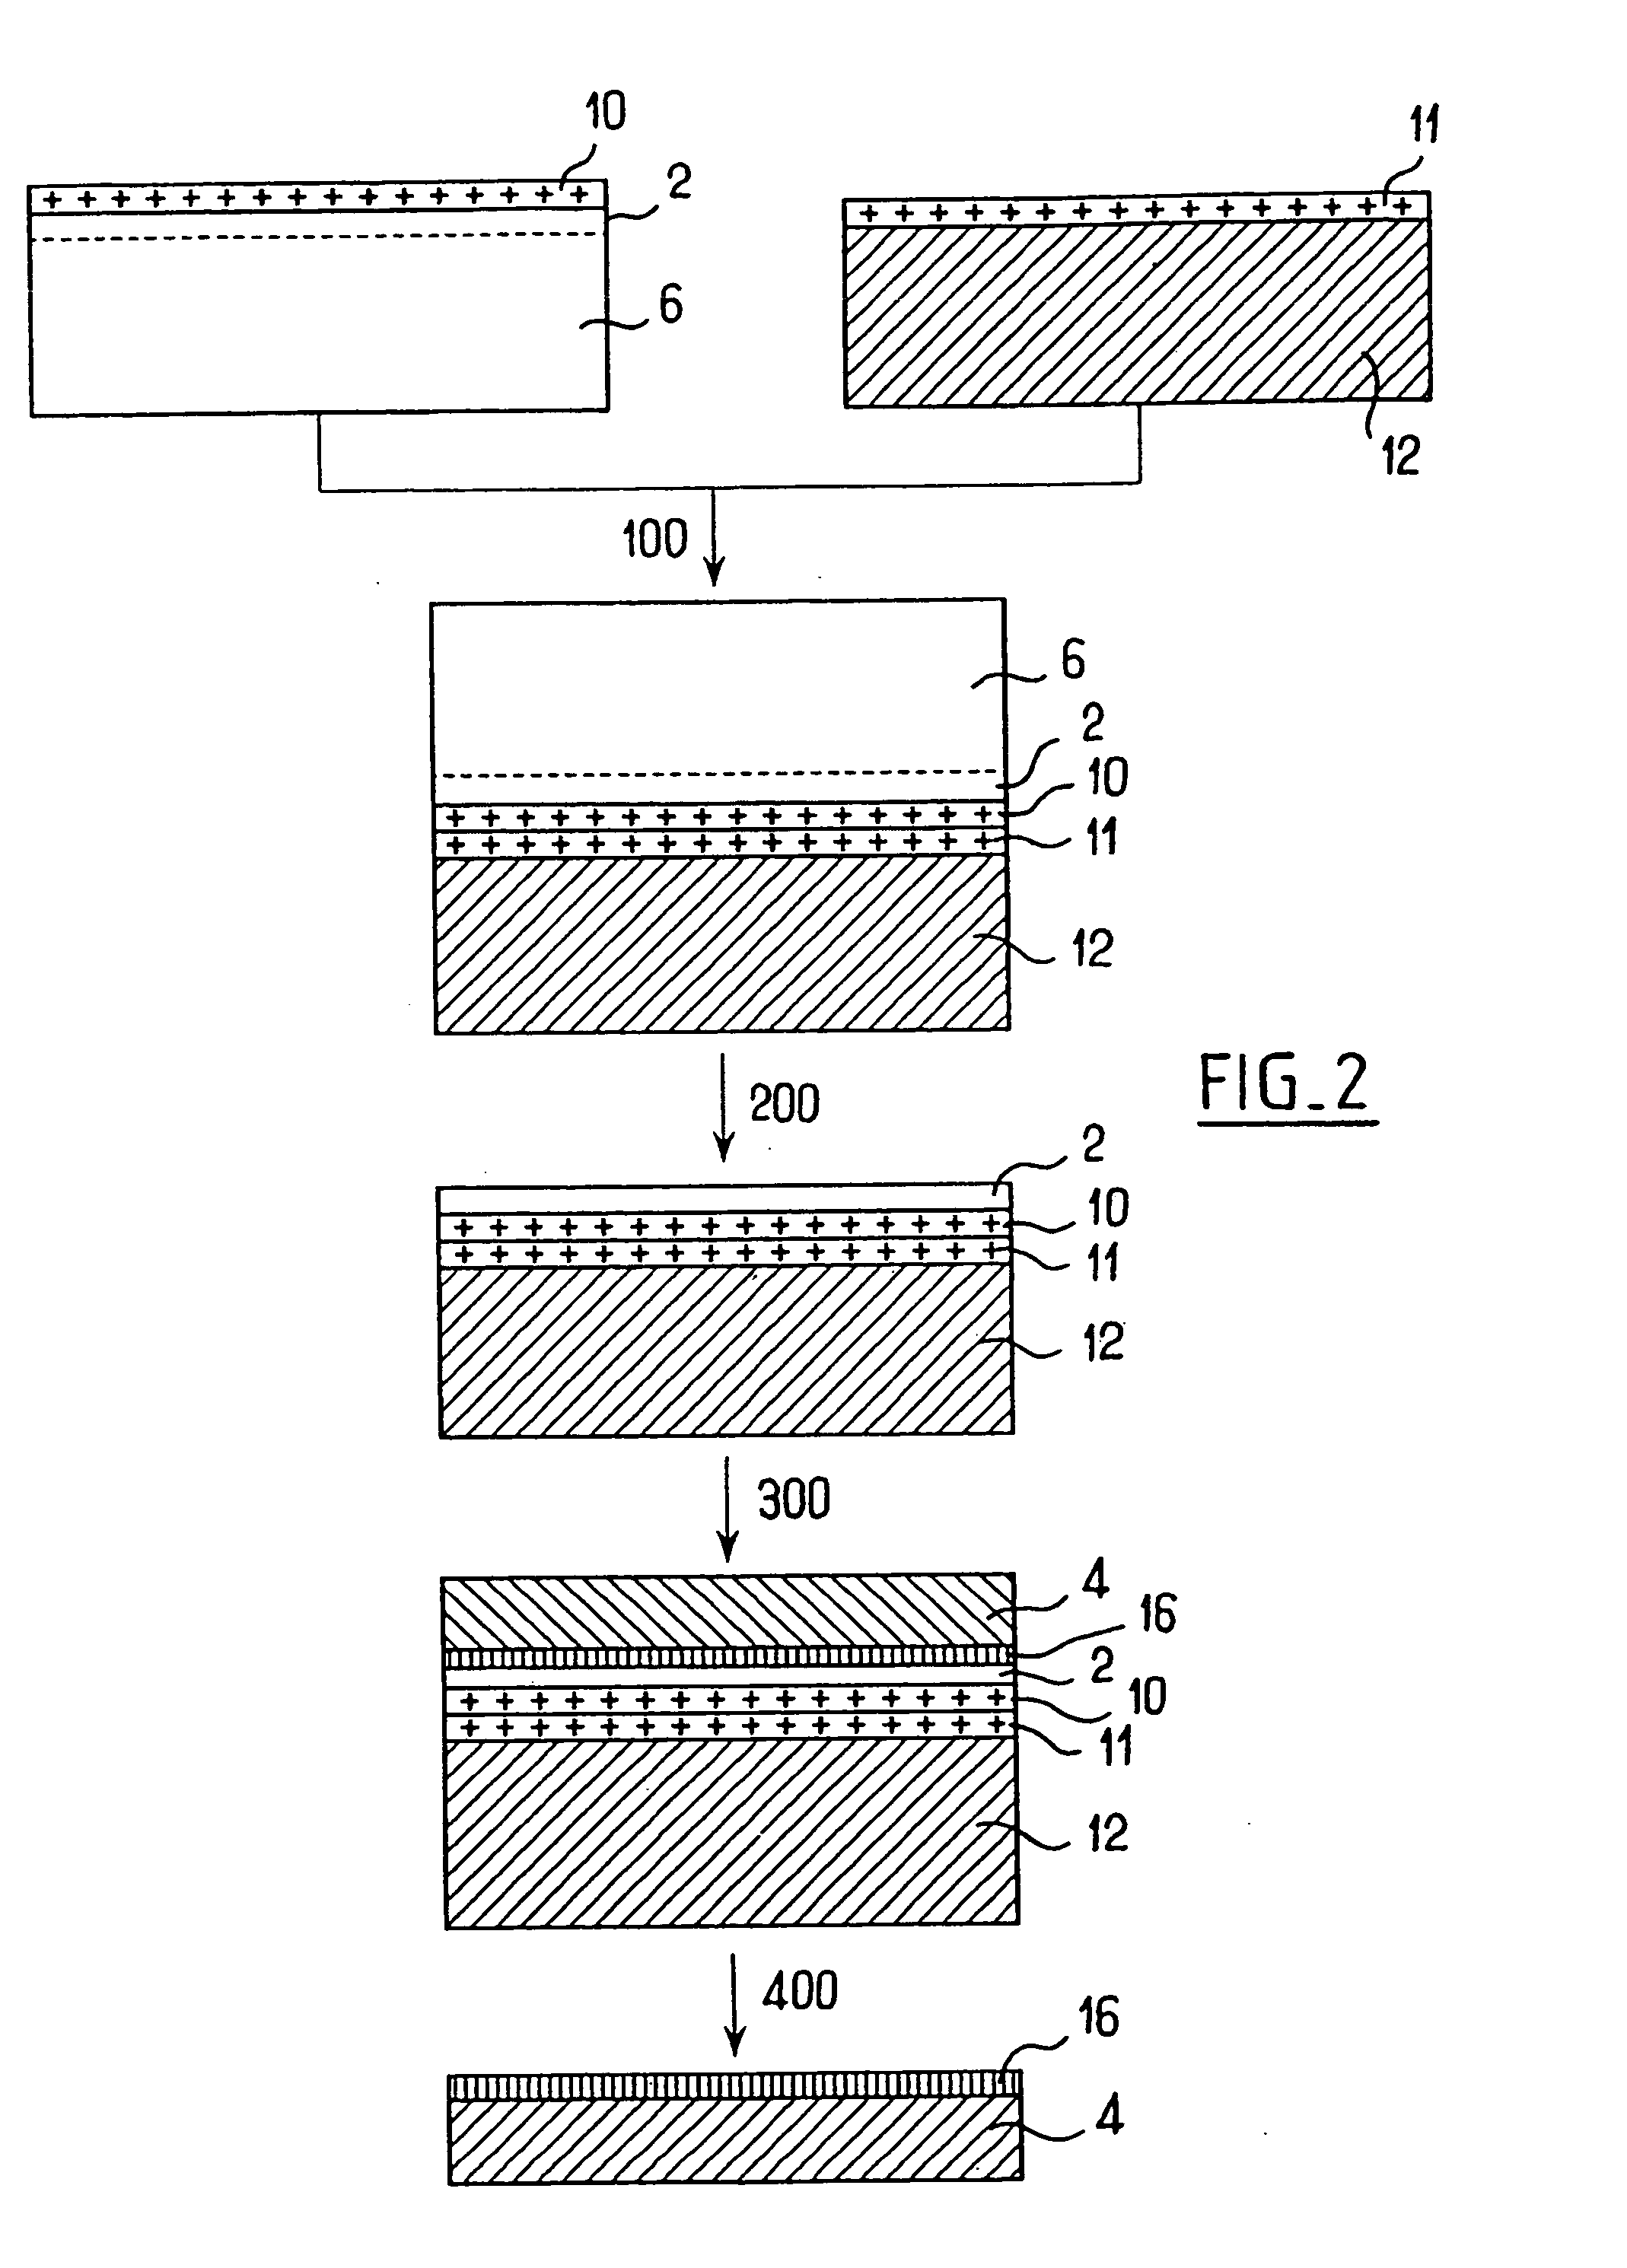 Methods for fabricating a substrate